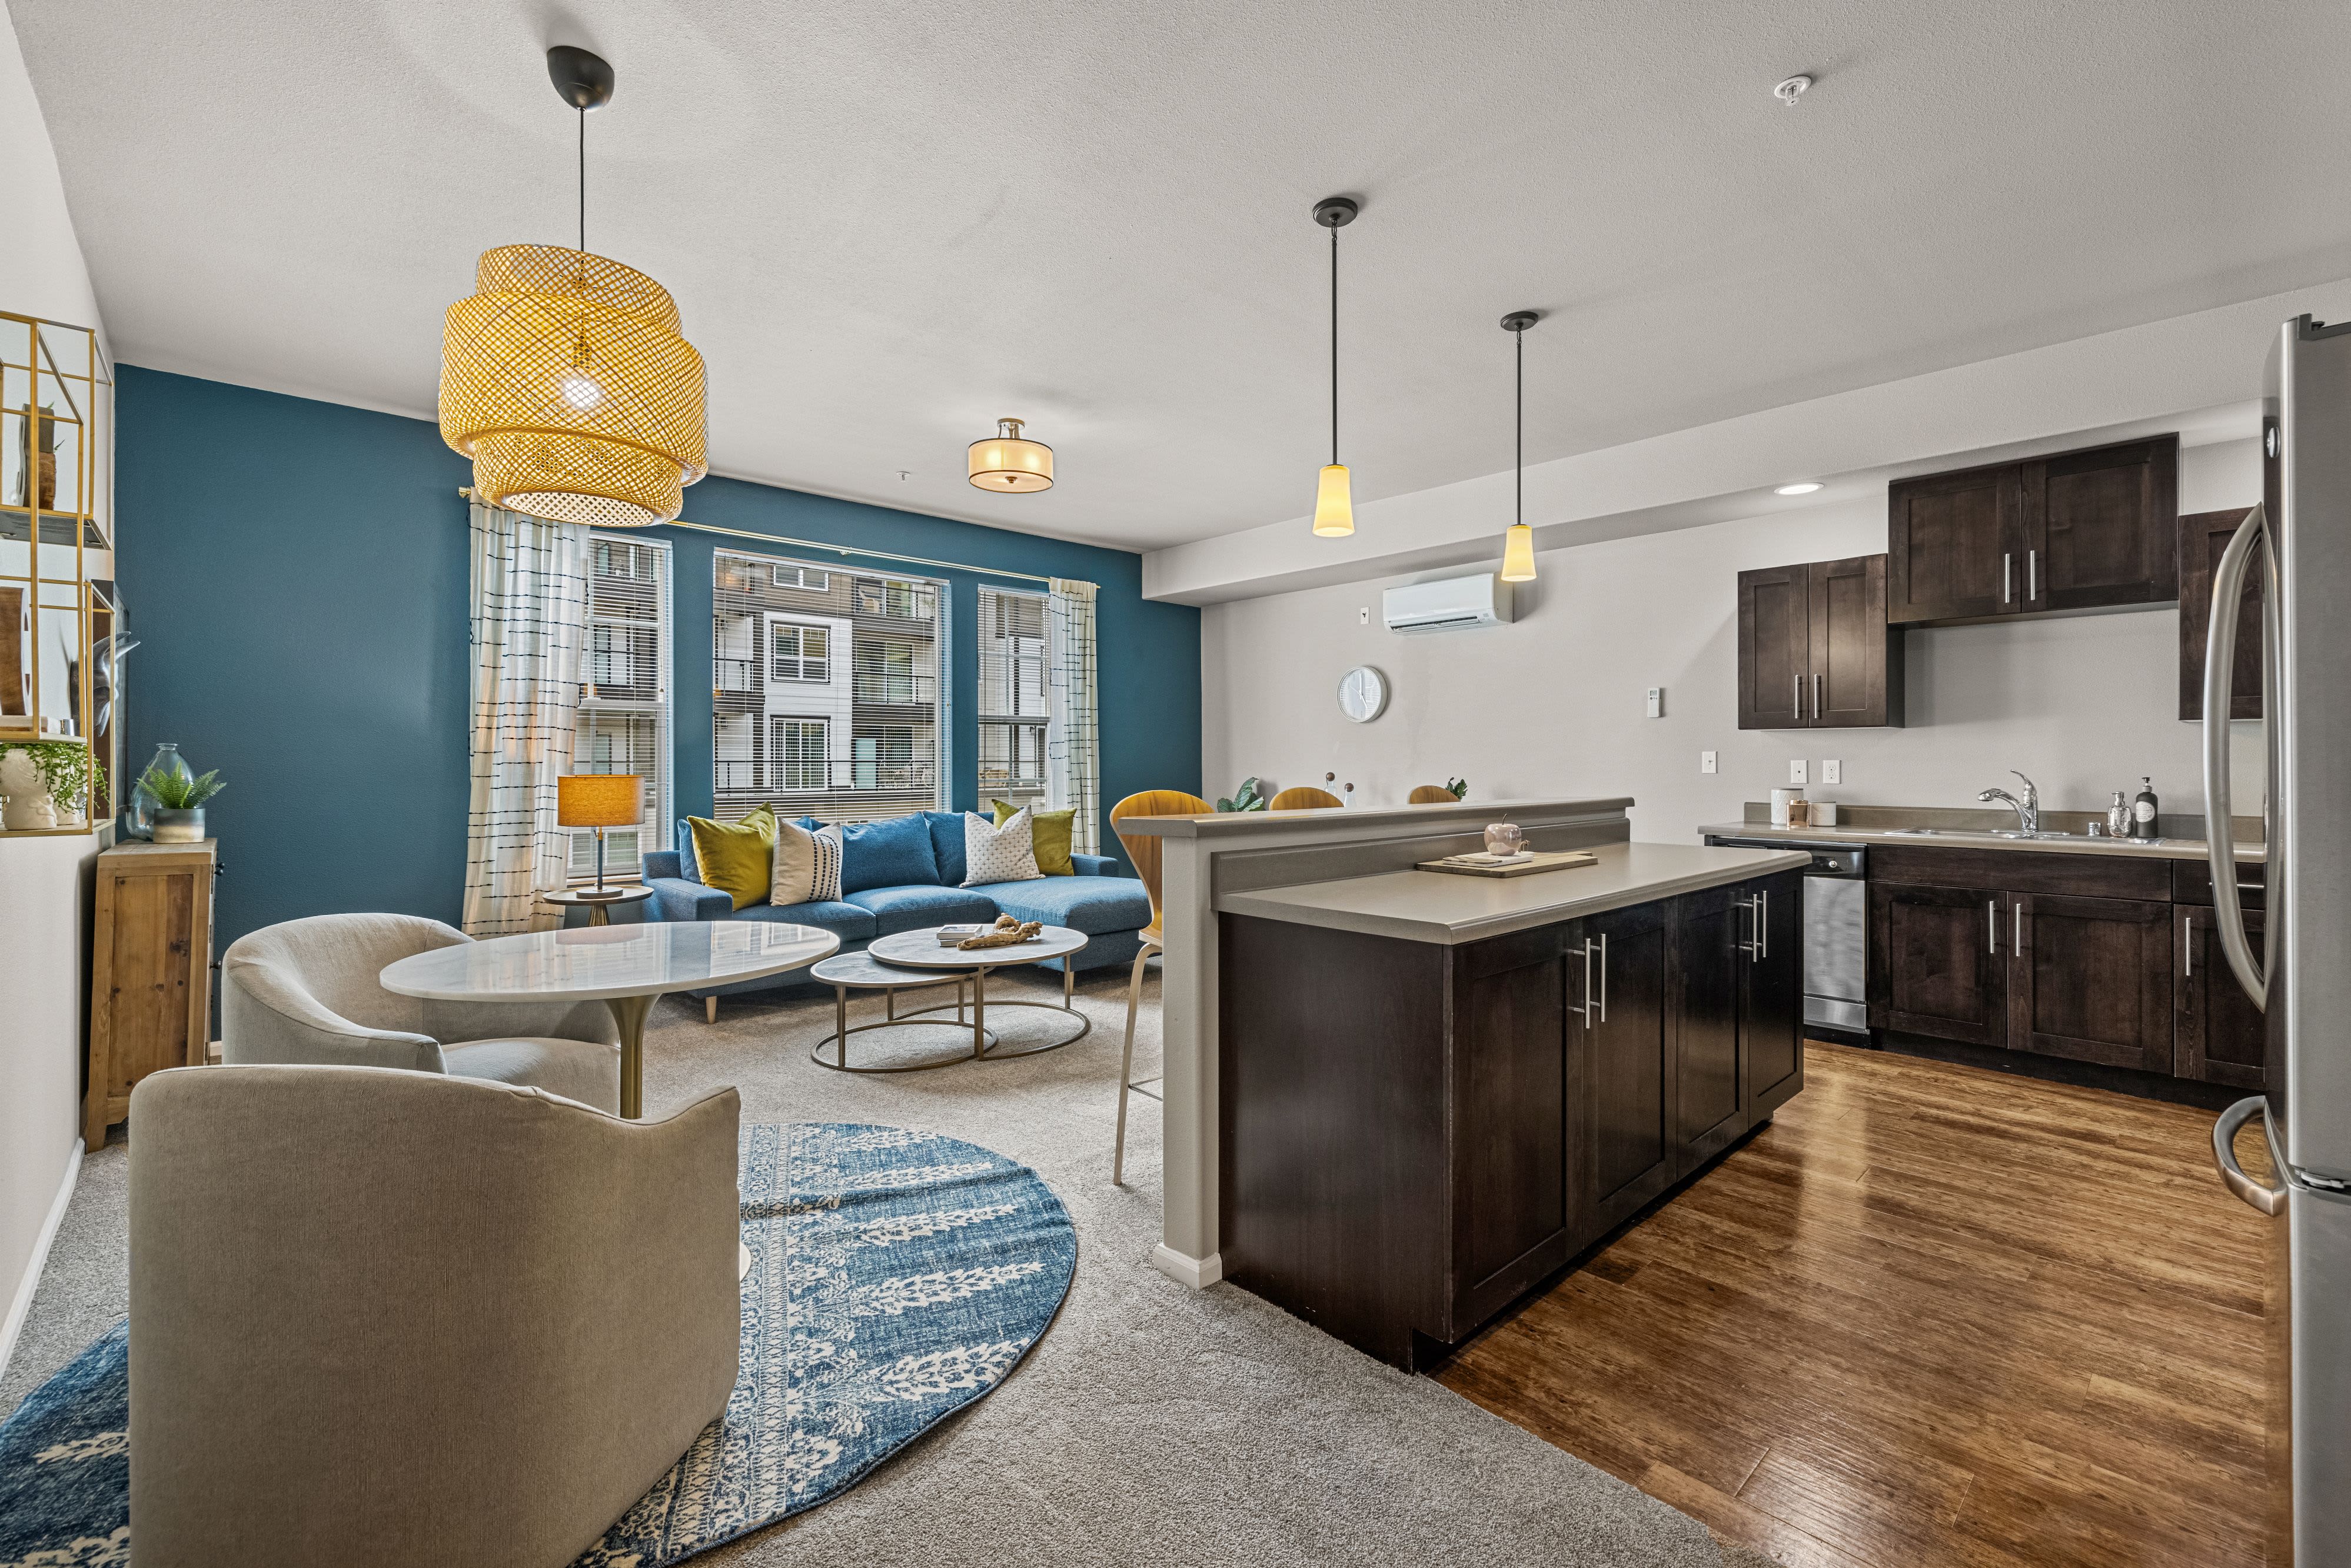 Spacious kitchen at Copperline at Point Ruston in Tacoma, Washington